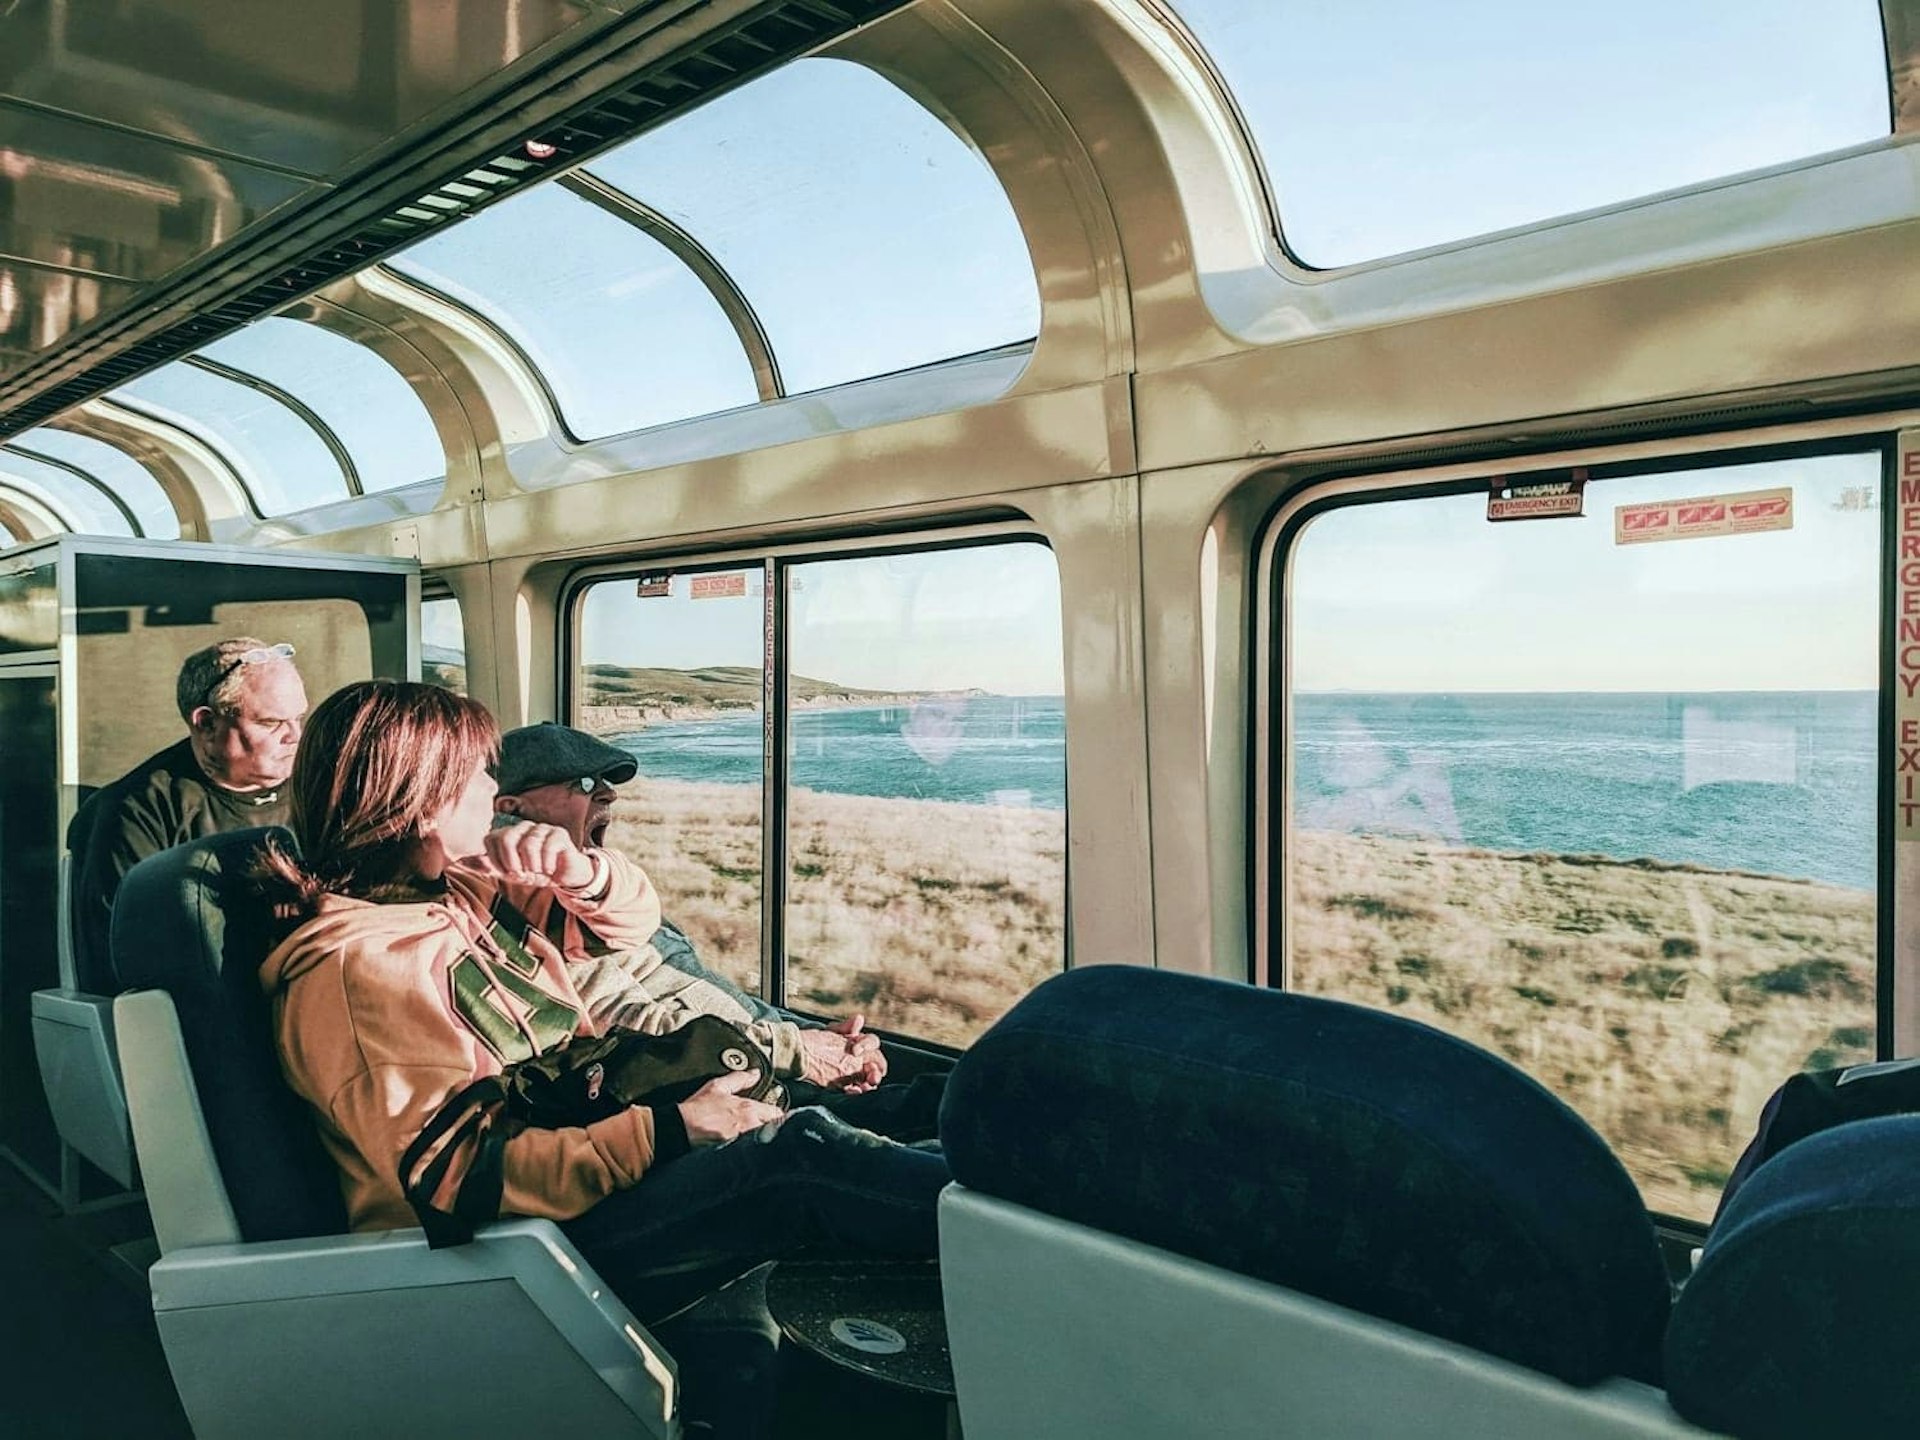 A trio of passengers sits in the viewing lounge car on the Coast Starlight route as it passes through Paso Robles. One older gentleman yawns as he admires the scenery. A woman with short dark hair is just turned away from the camera. A third man sits behind the yawning gent staring contemplatively out the window.